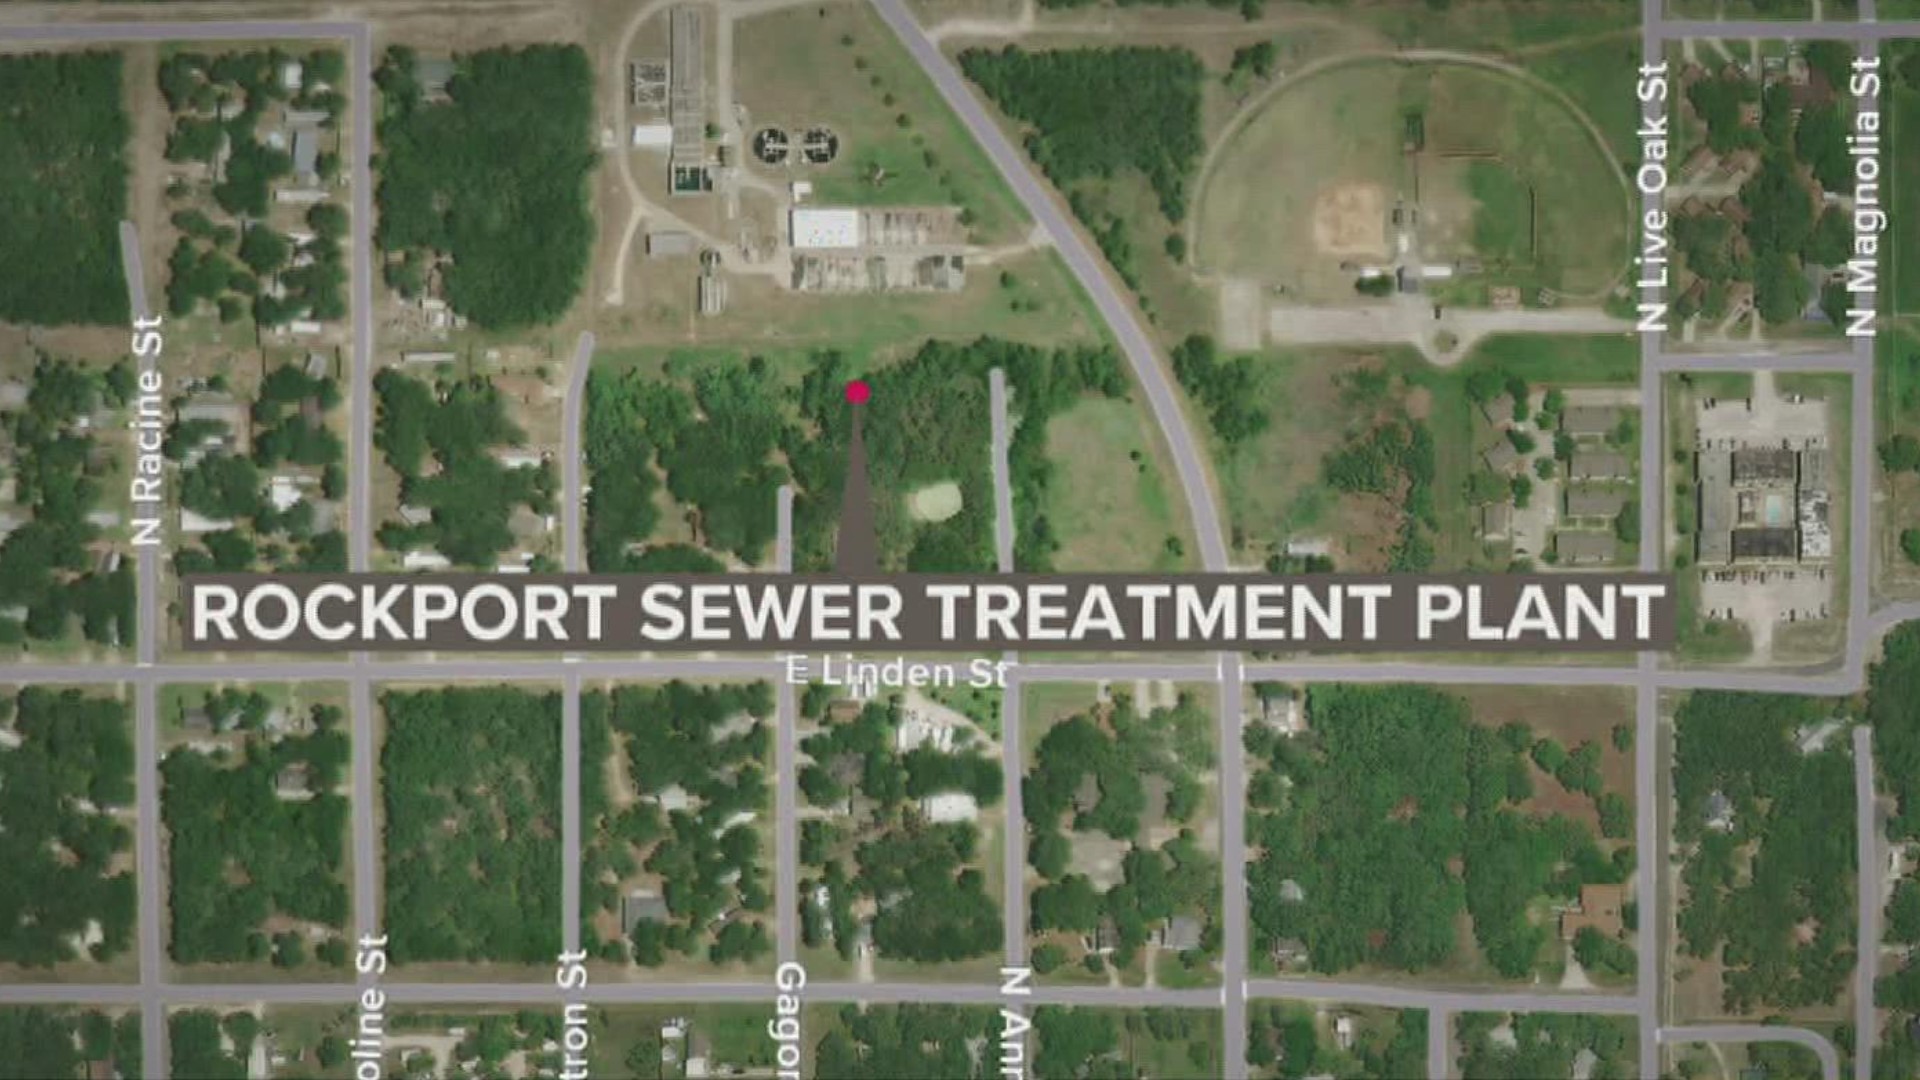 There was no discharge left on the city's property and the spill was self-contained in it's treatment plant.